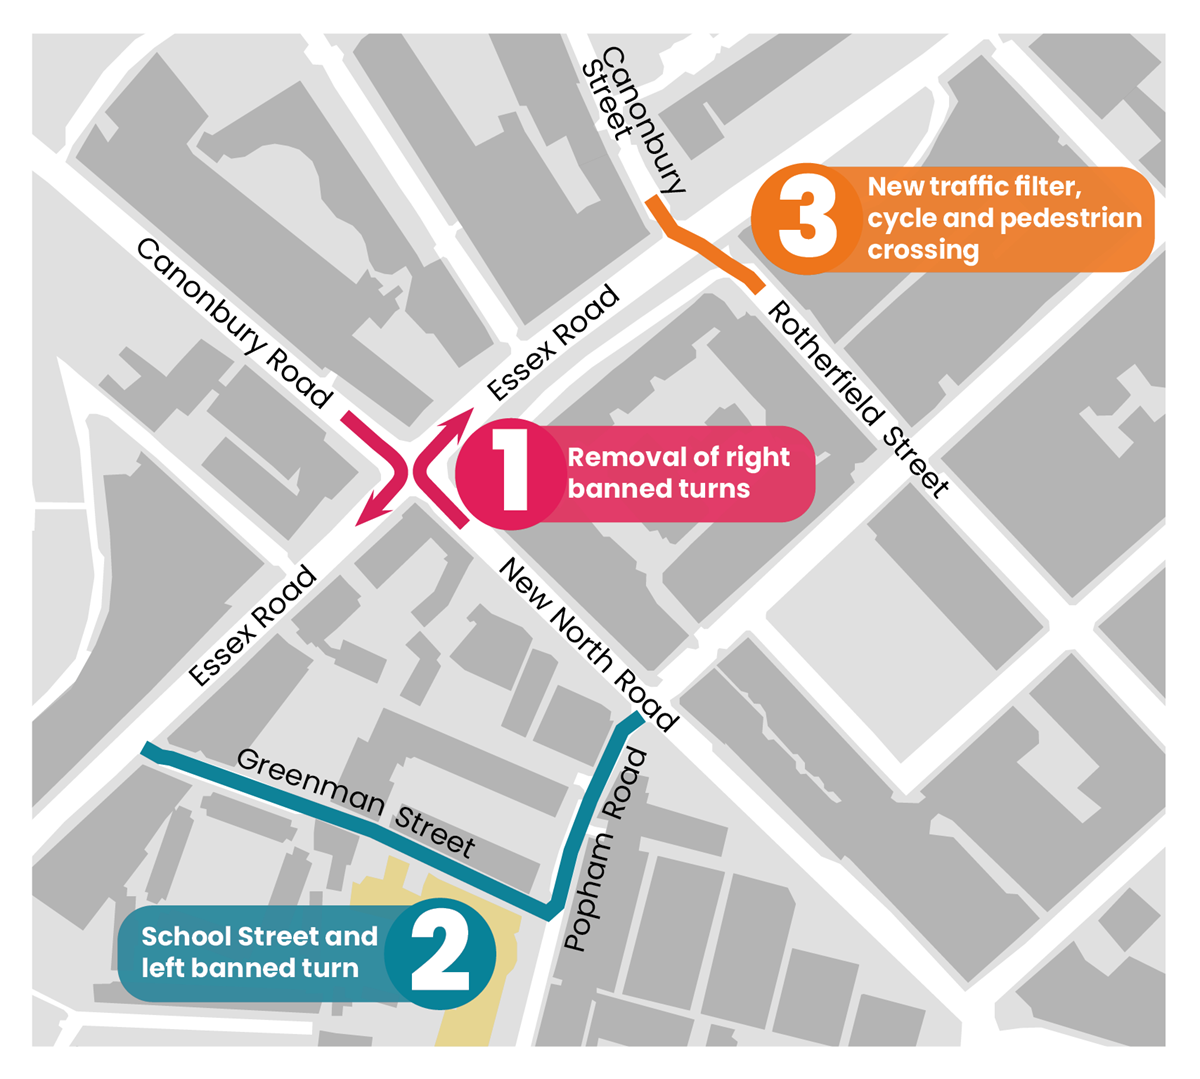 A map showing the proposed improvements on Essex Road, including removing banned right turns on main roads, creating a School Street at New North Academy, and creating a new cycle and pedestrian crossing at the junction of Essex Road and Canonbury Street.